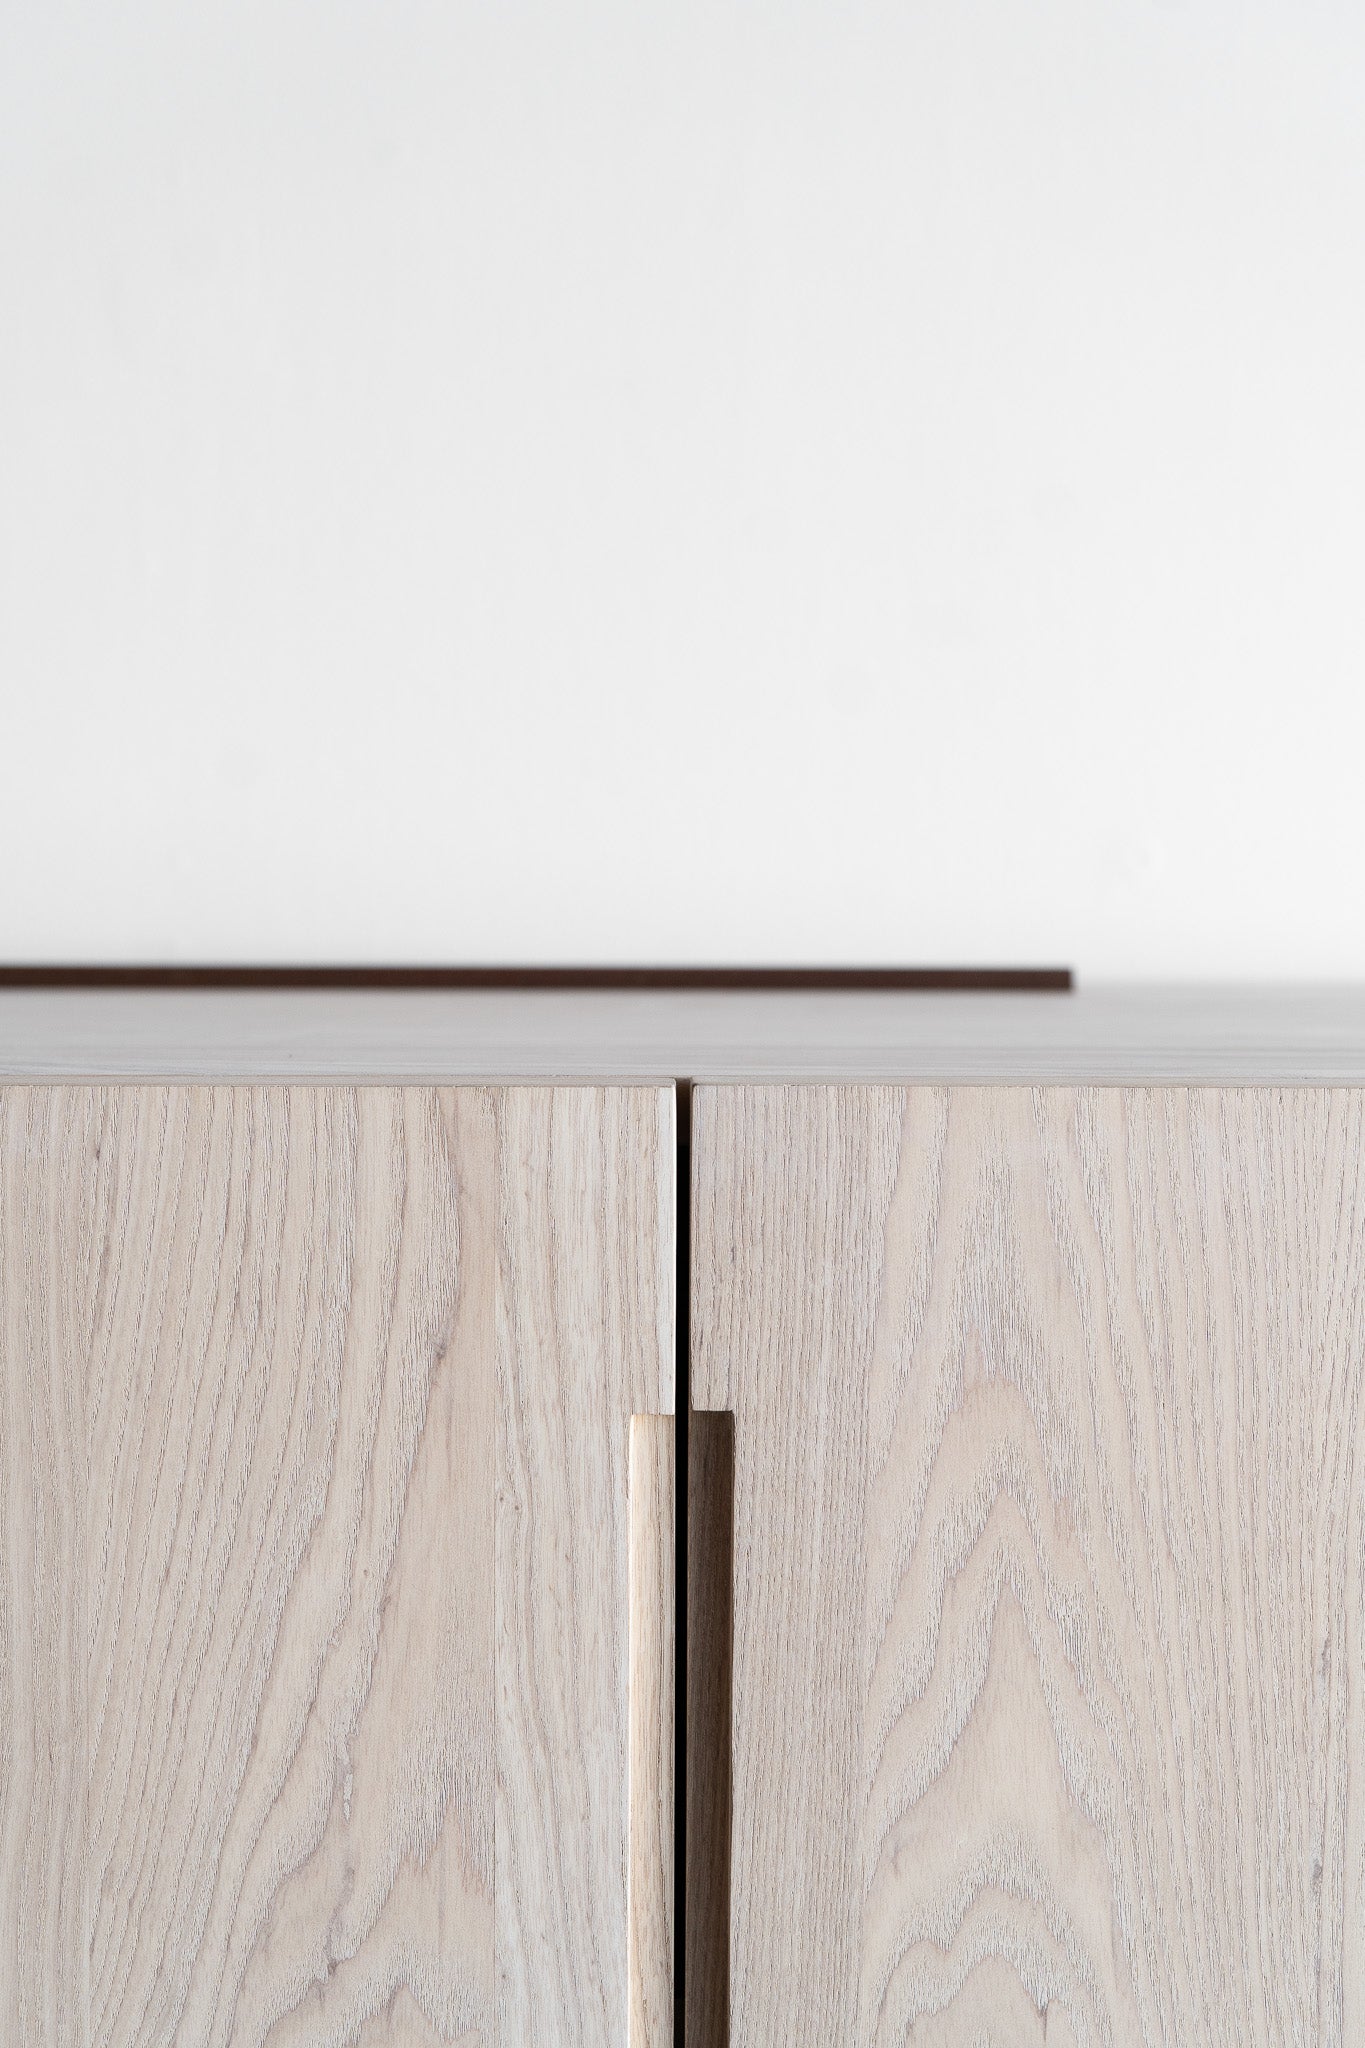 Rosa credenza- steel casing and wood cabinet